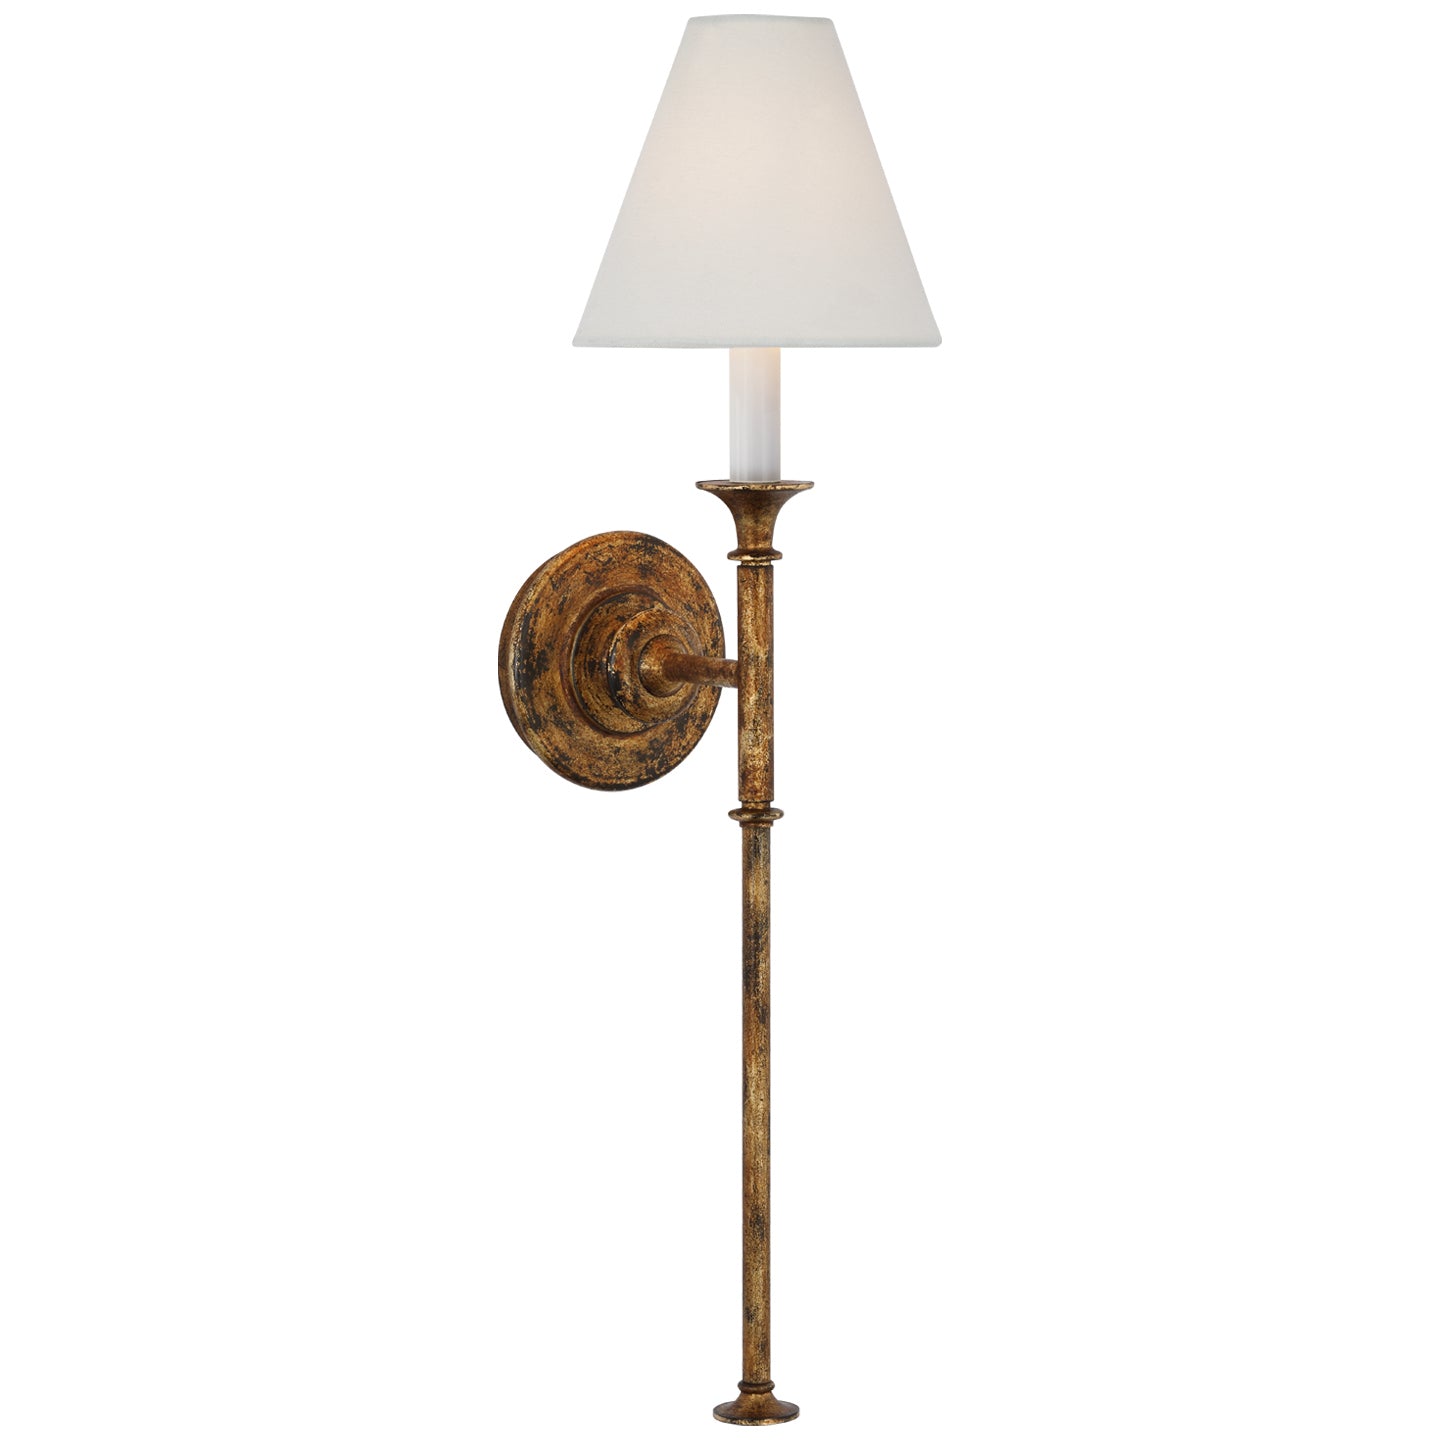 Load image into Gallery viewer, Visual Comfort Signature - TOB 2453AG-L - LED Wall Sconce - Piaf - Antique Gild
